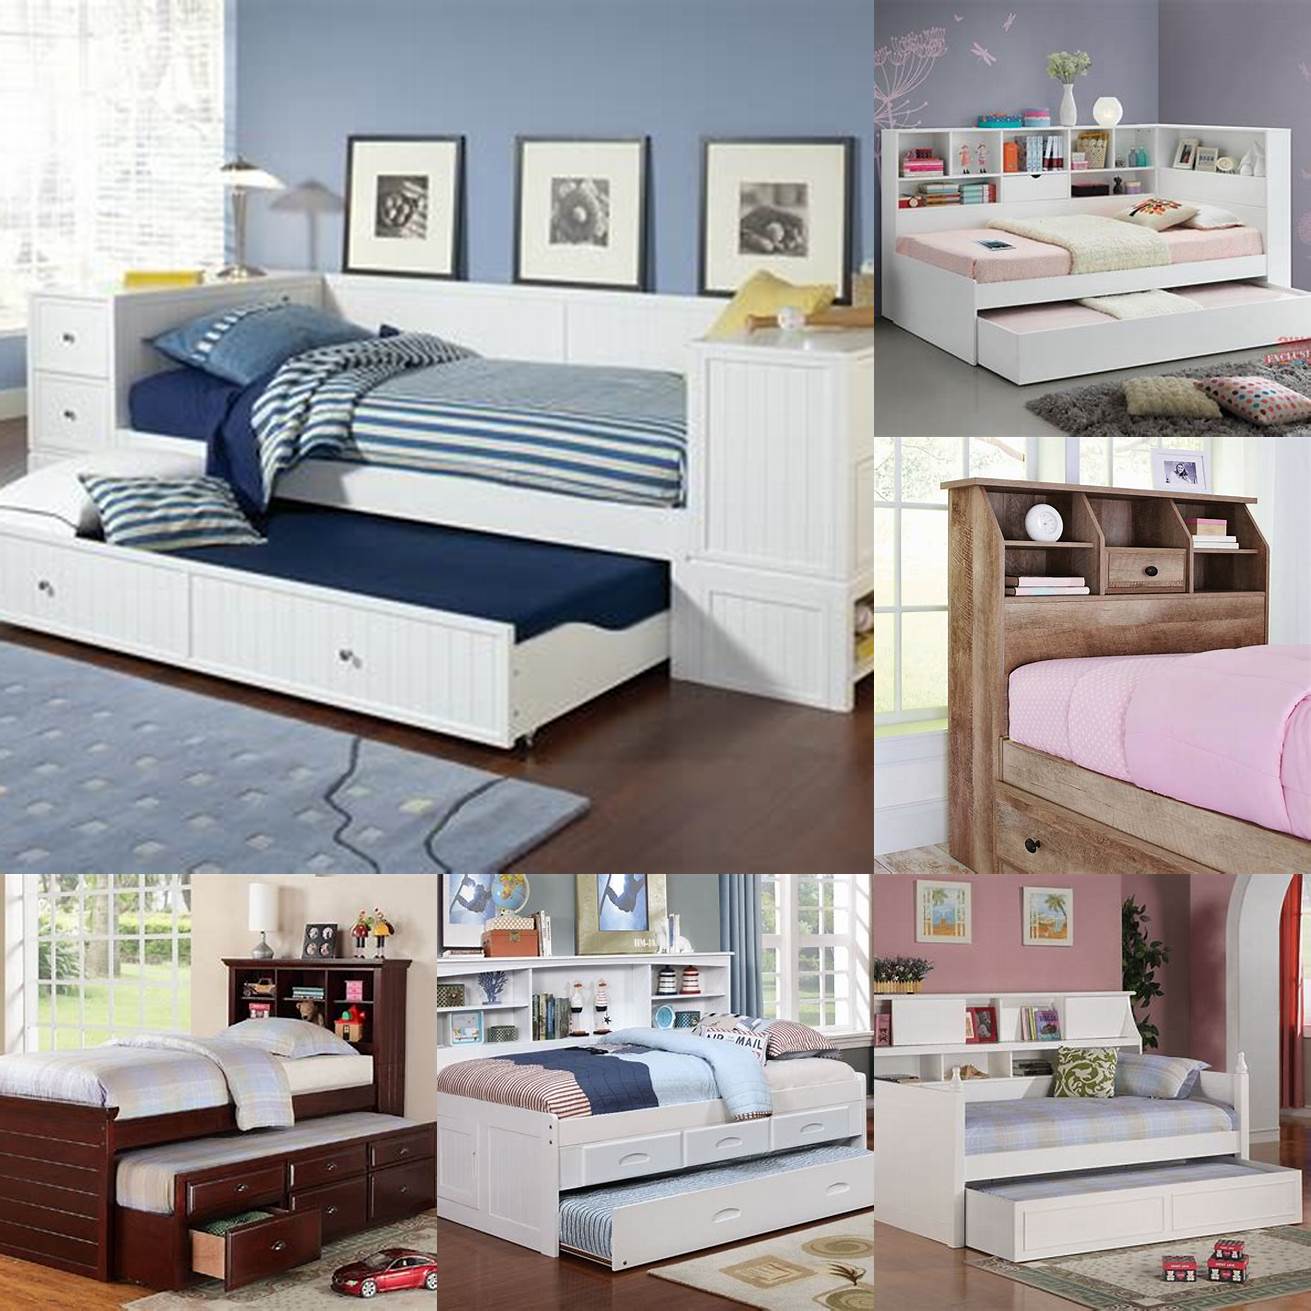 A trundle bed with a bookshelf headboard is perfect for young readers